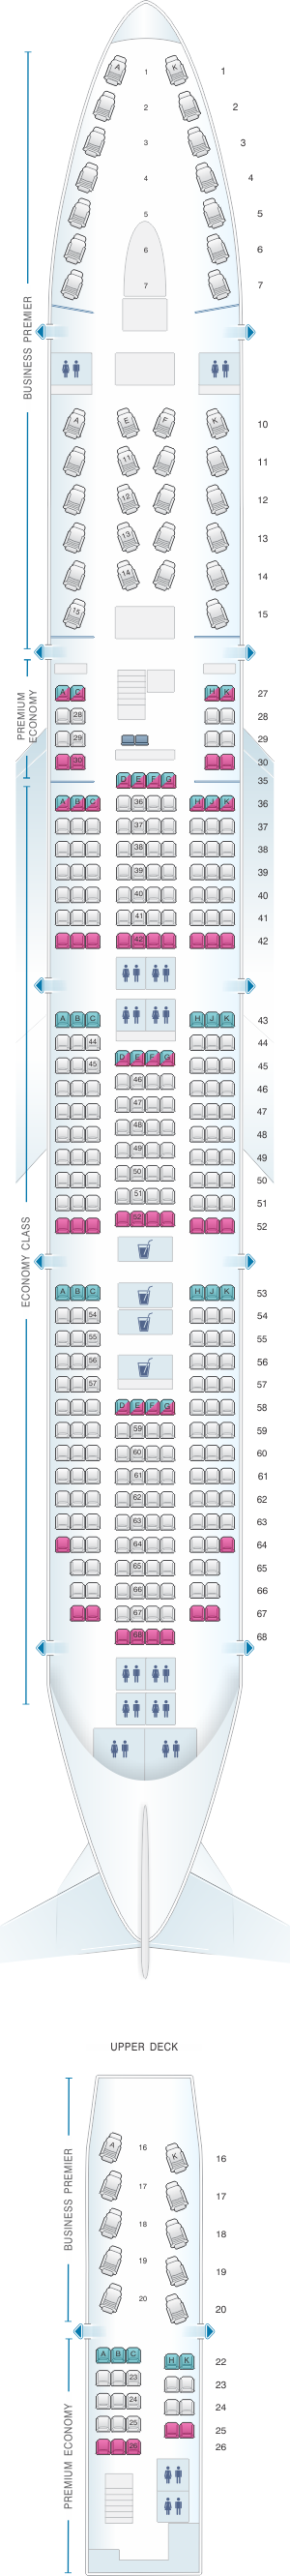 Seat map for Air New Zealand Boeing B747 400